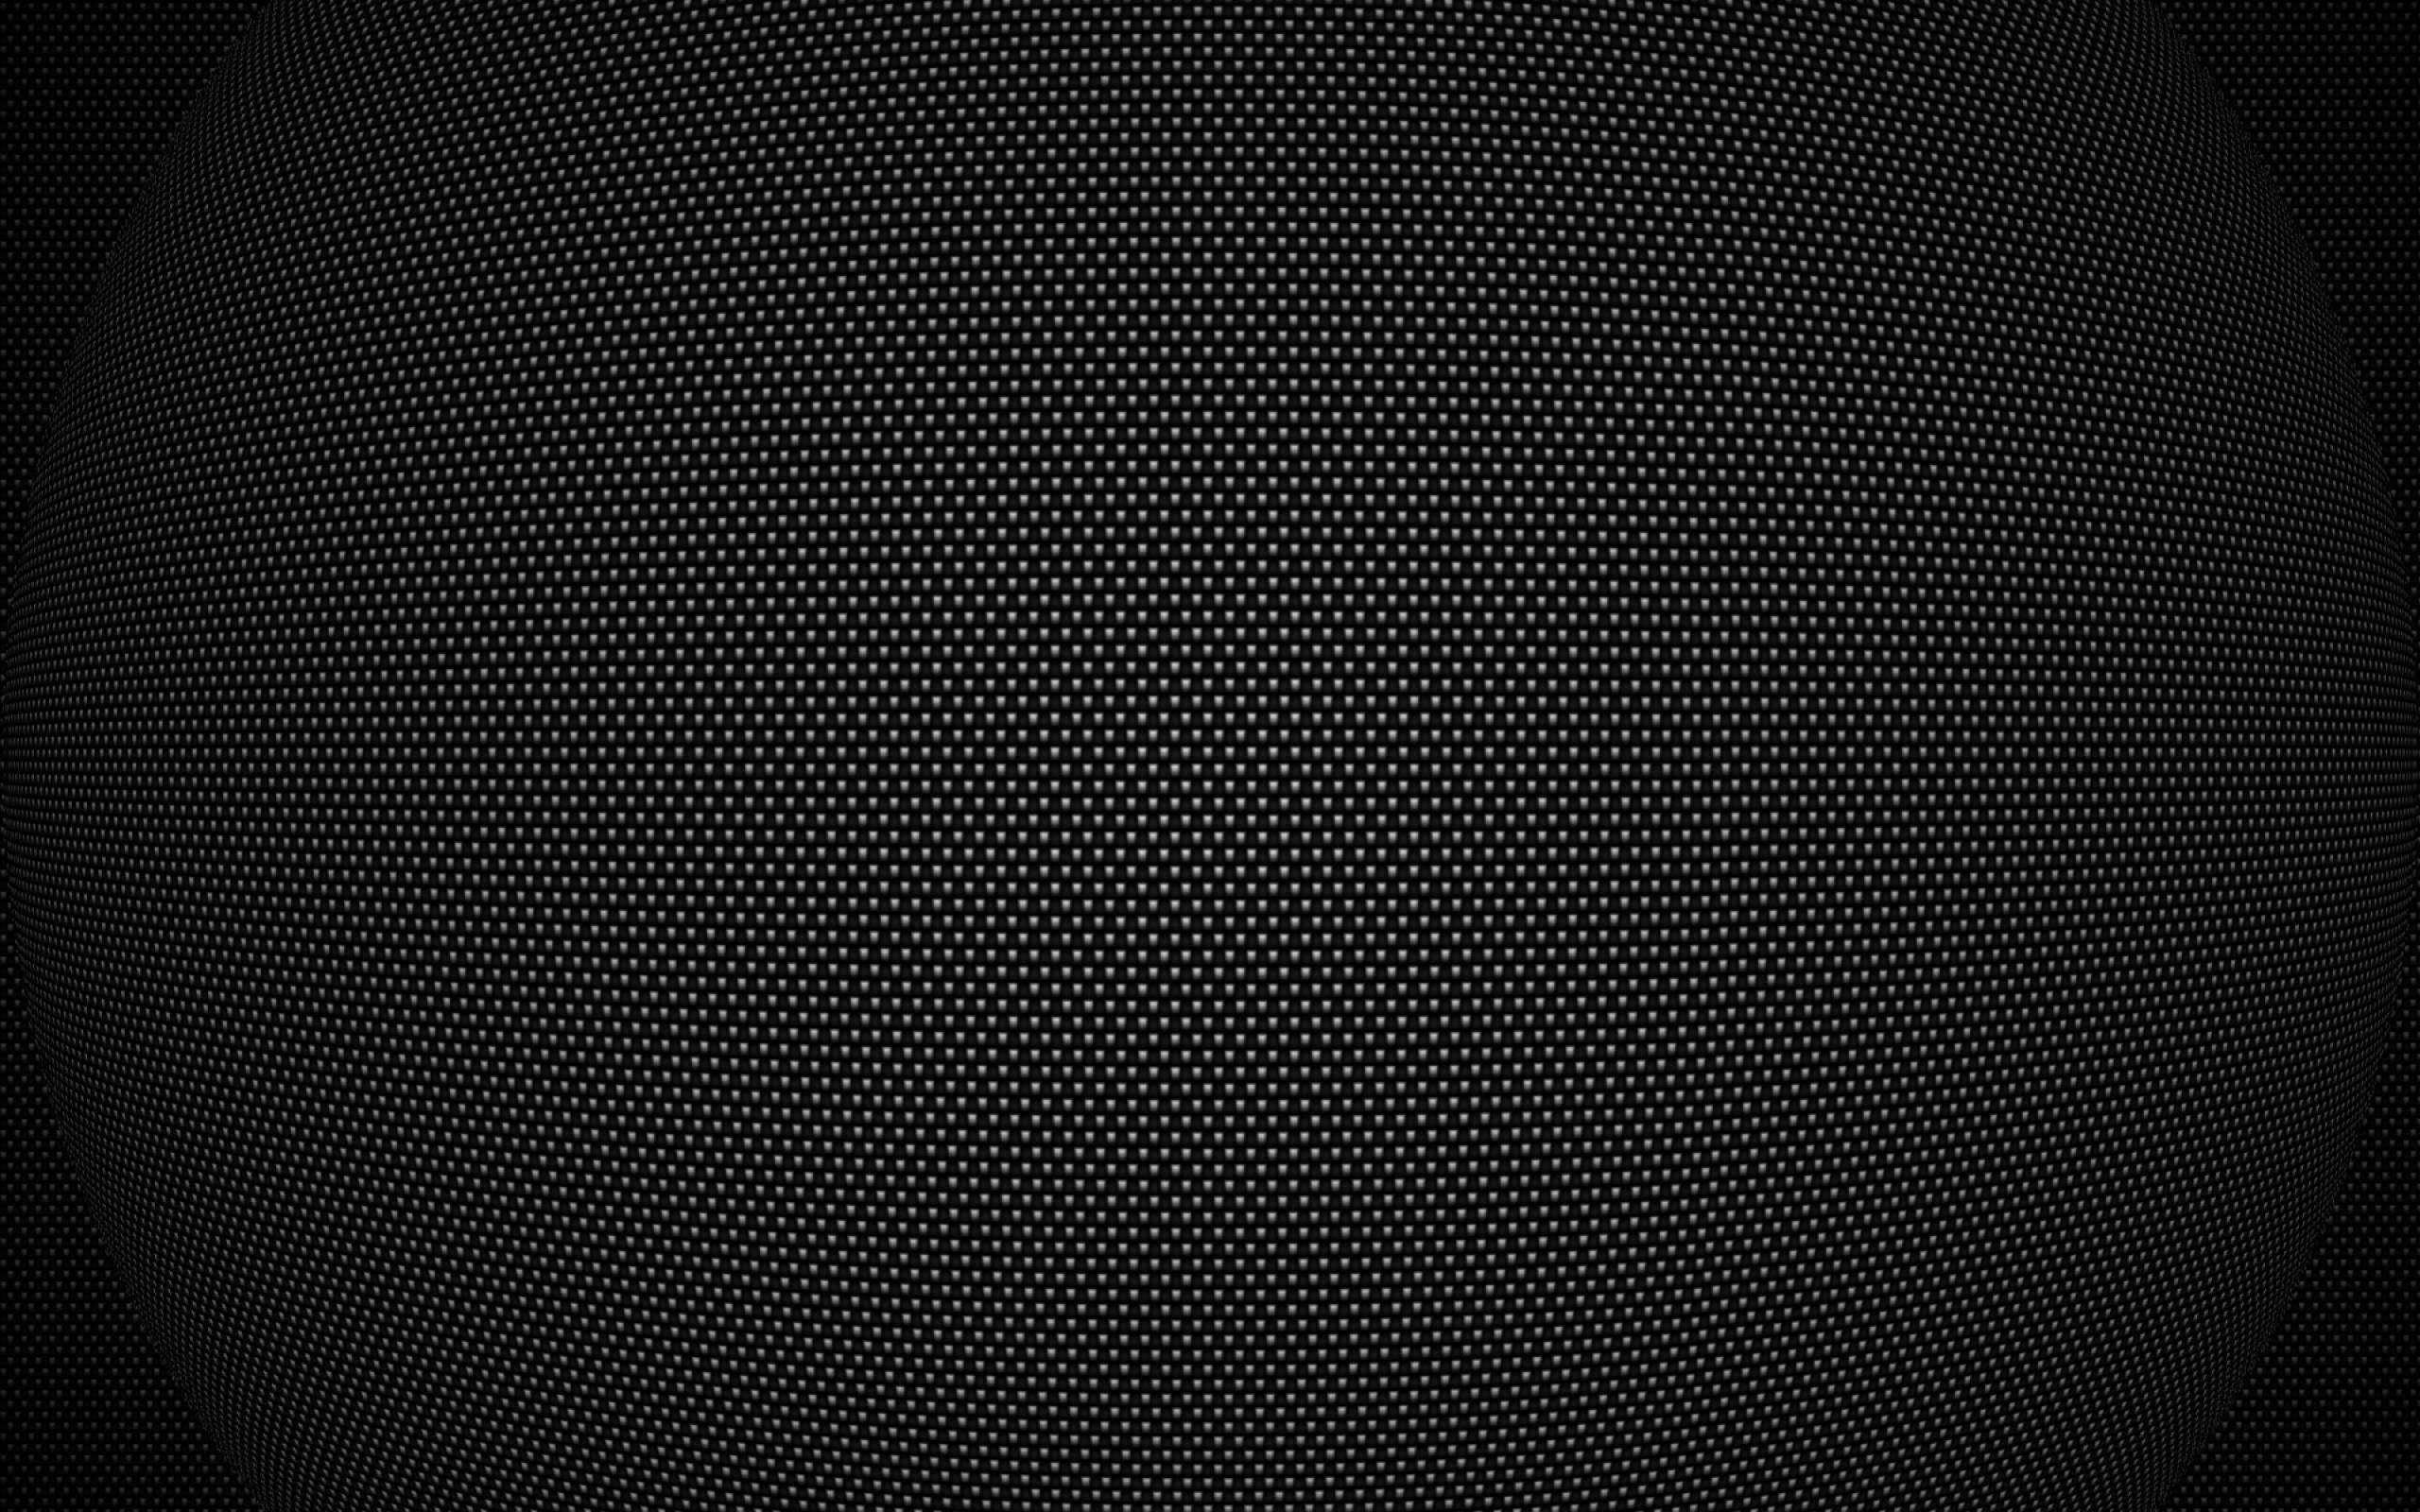 Dots wallpapers, Simple patterns, Background images, 2560x1600 HD Desktop